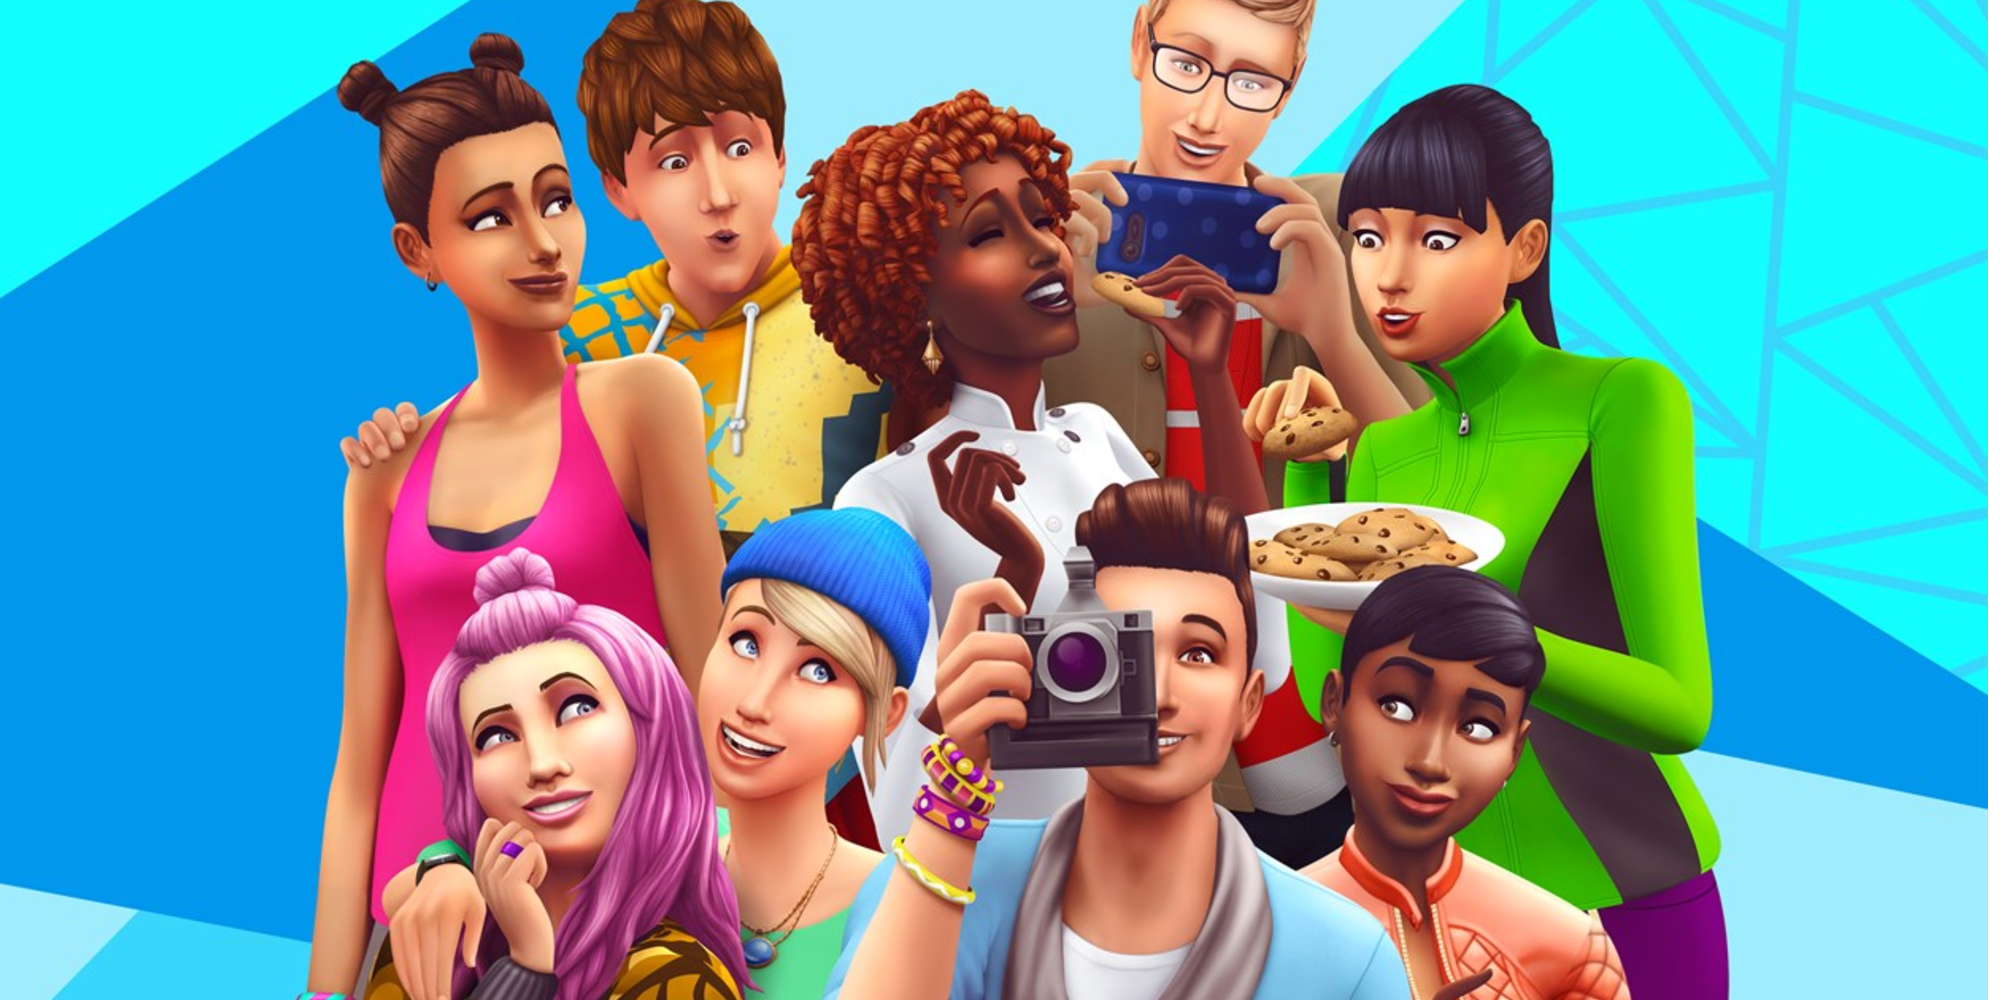 Sims 4 How Much It Costs To Buy Every Expansion Pack